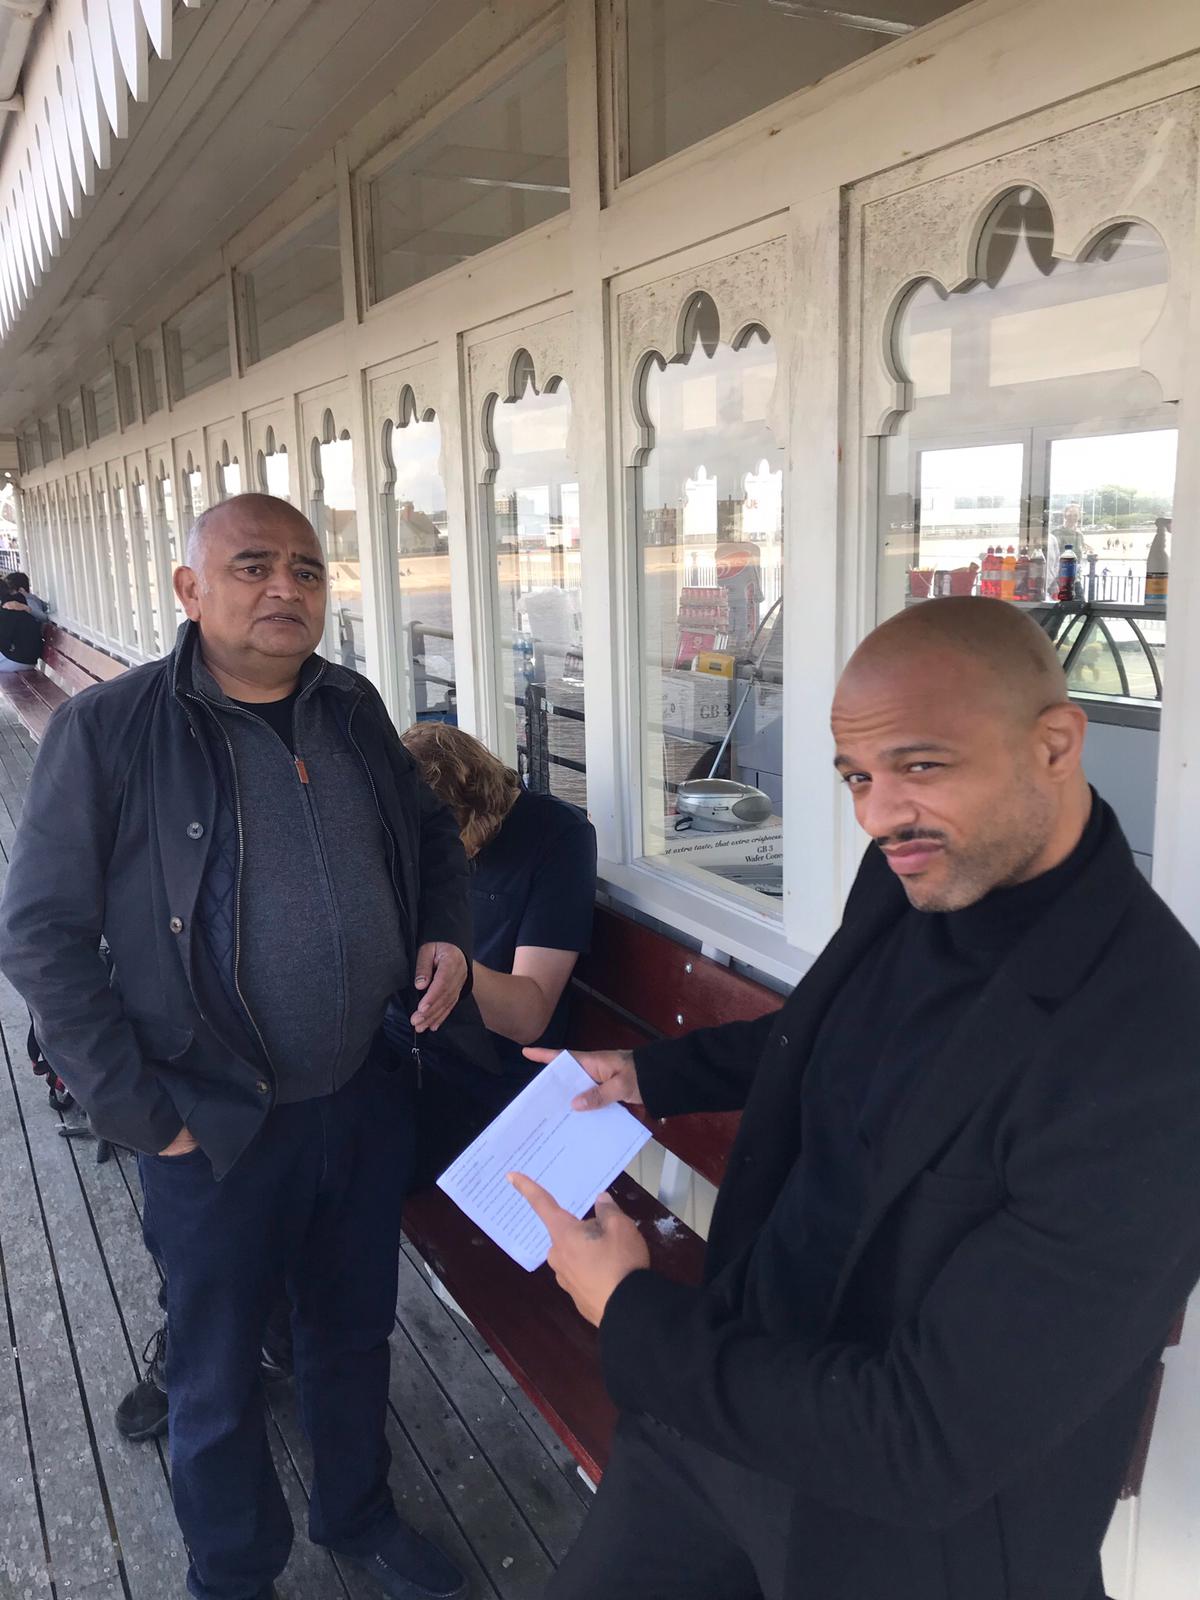 Peter Sinseeya from Southport is starring on Come Dine With Me on Channel 4. He has been filming a TV series called Matopulas, which included scenes on Southport Pier